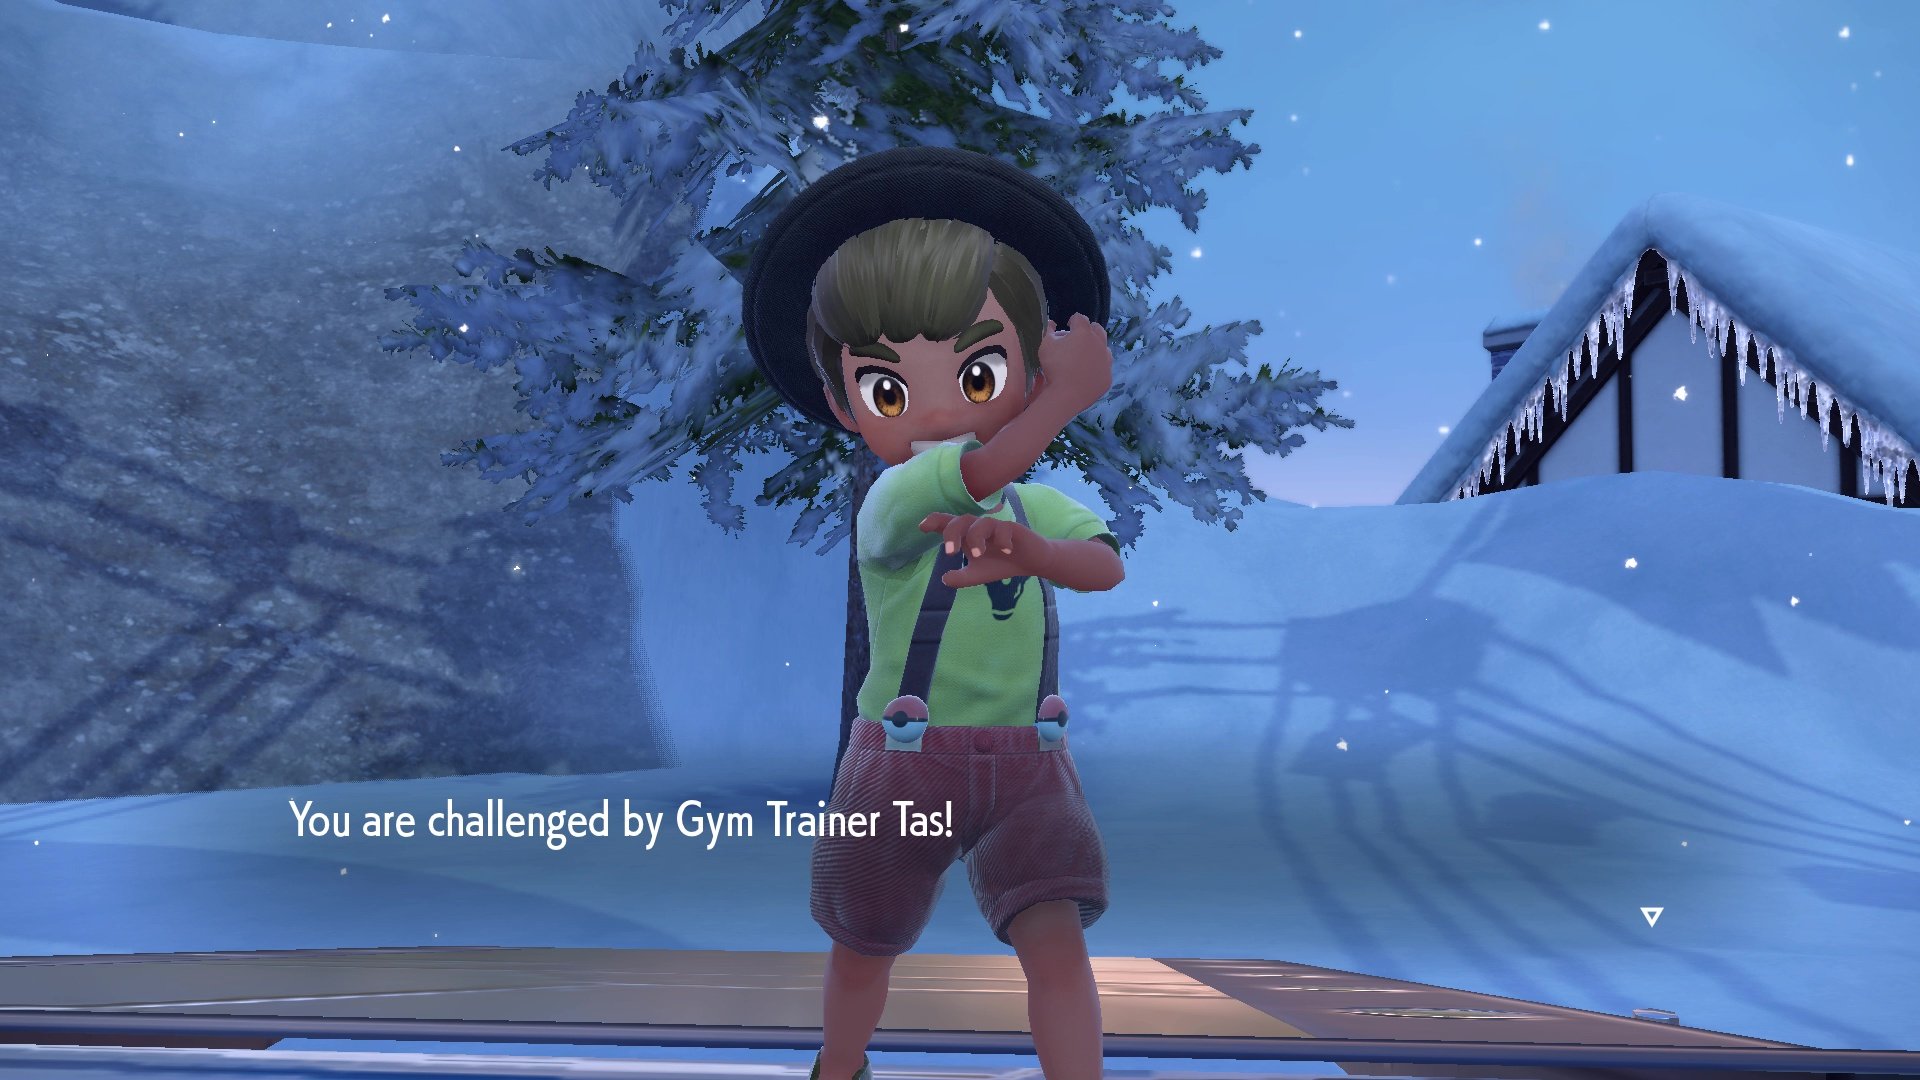 You'll face Gym Trainer Tas